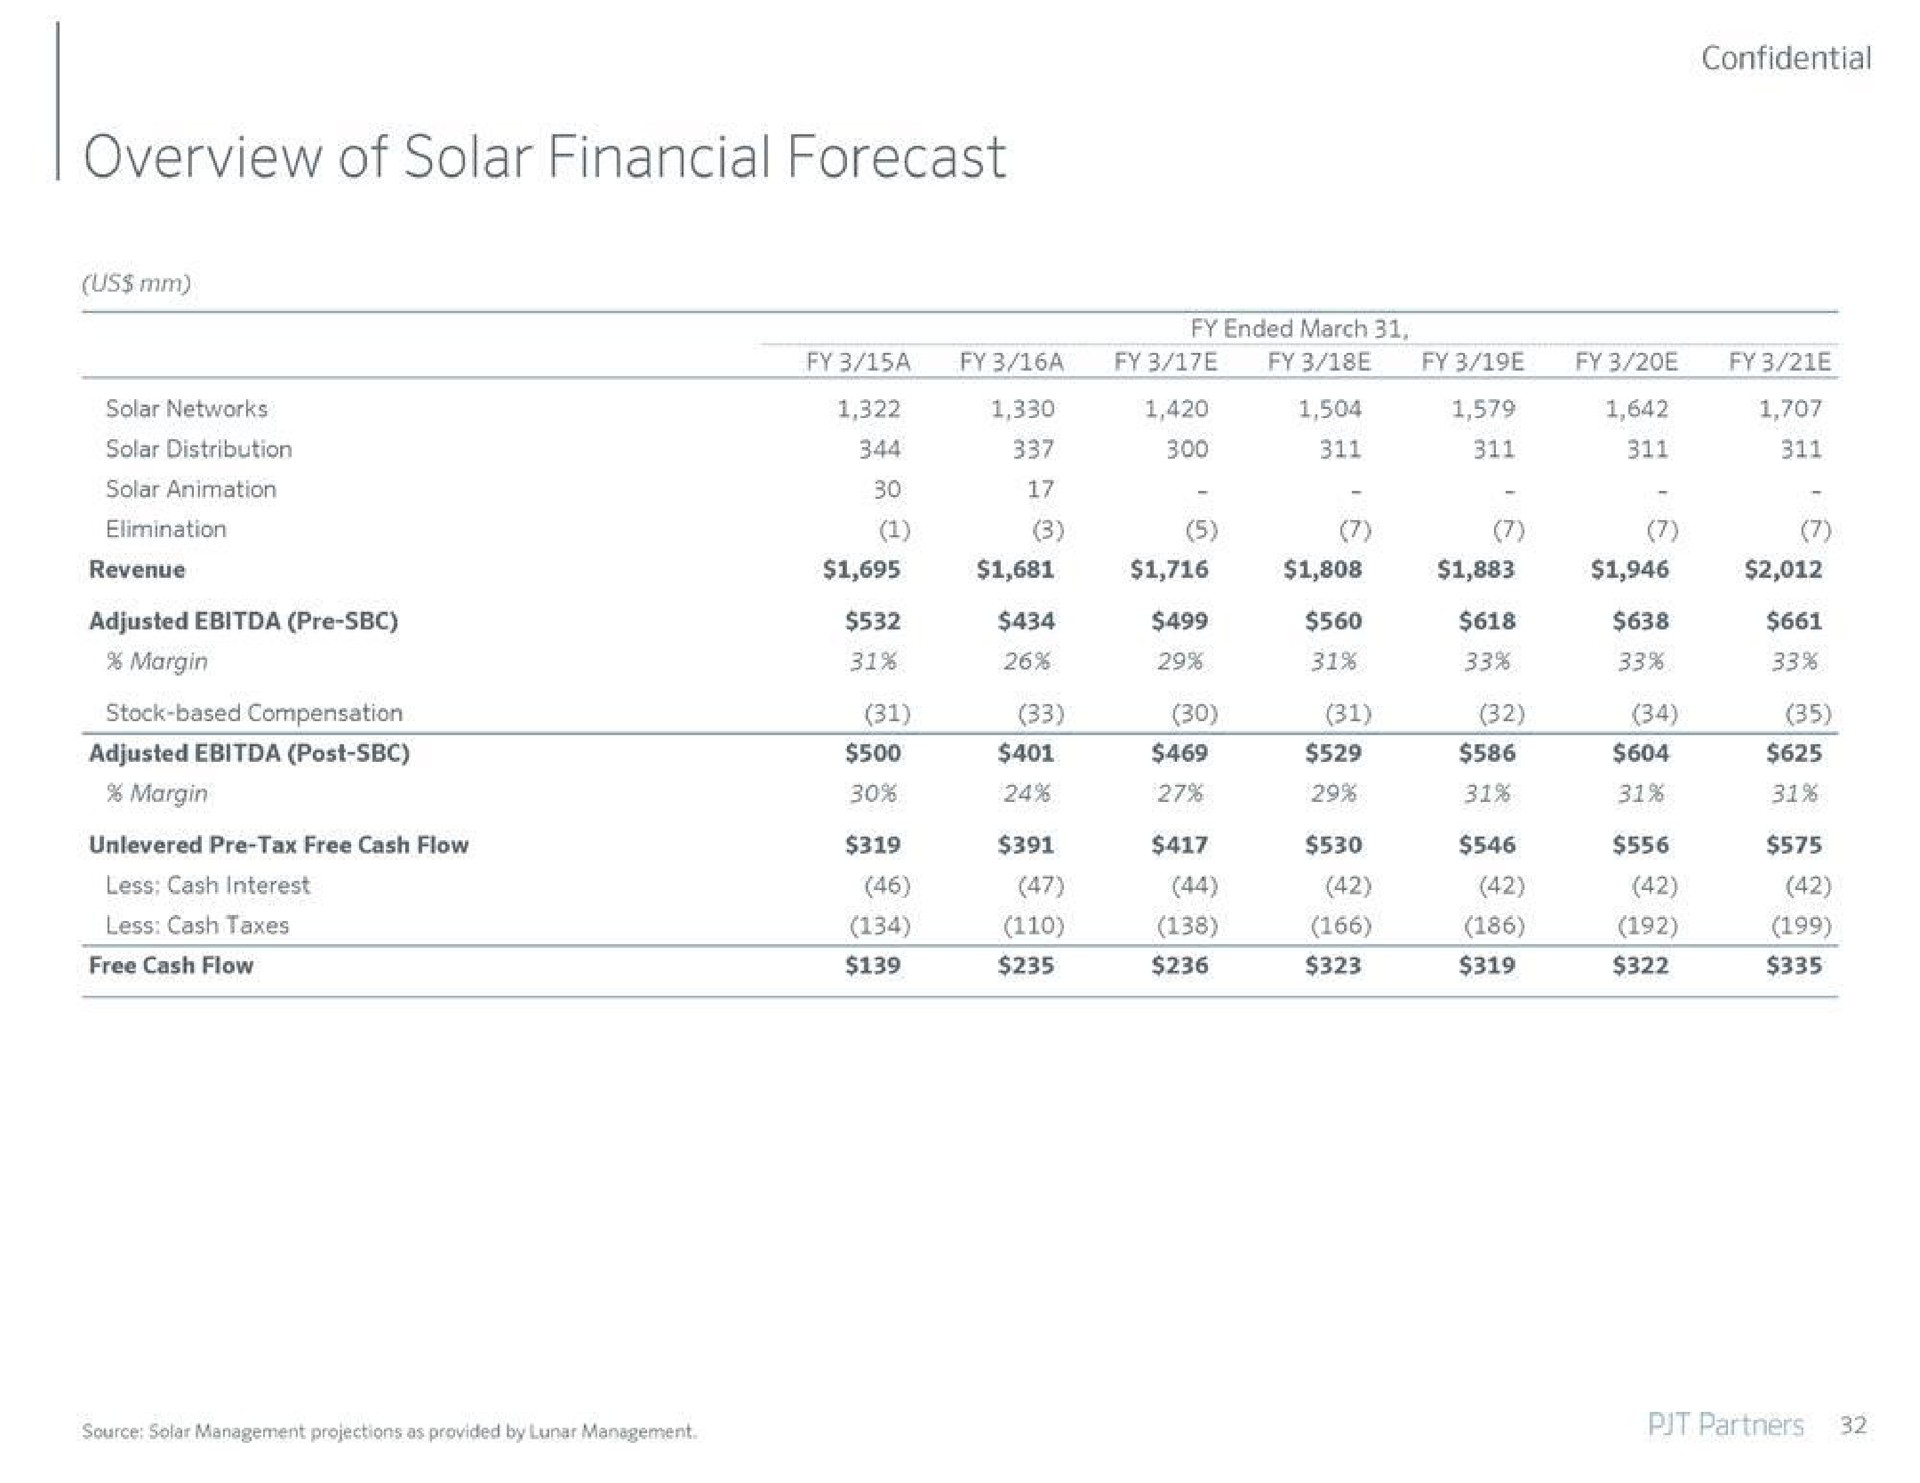 overview of solar financial forecast | PJT Partners